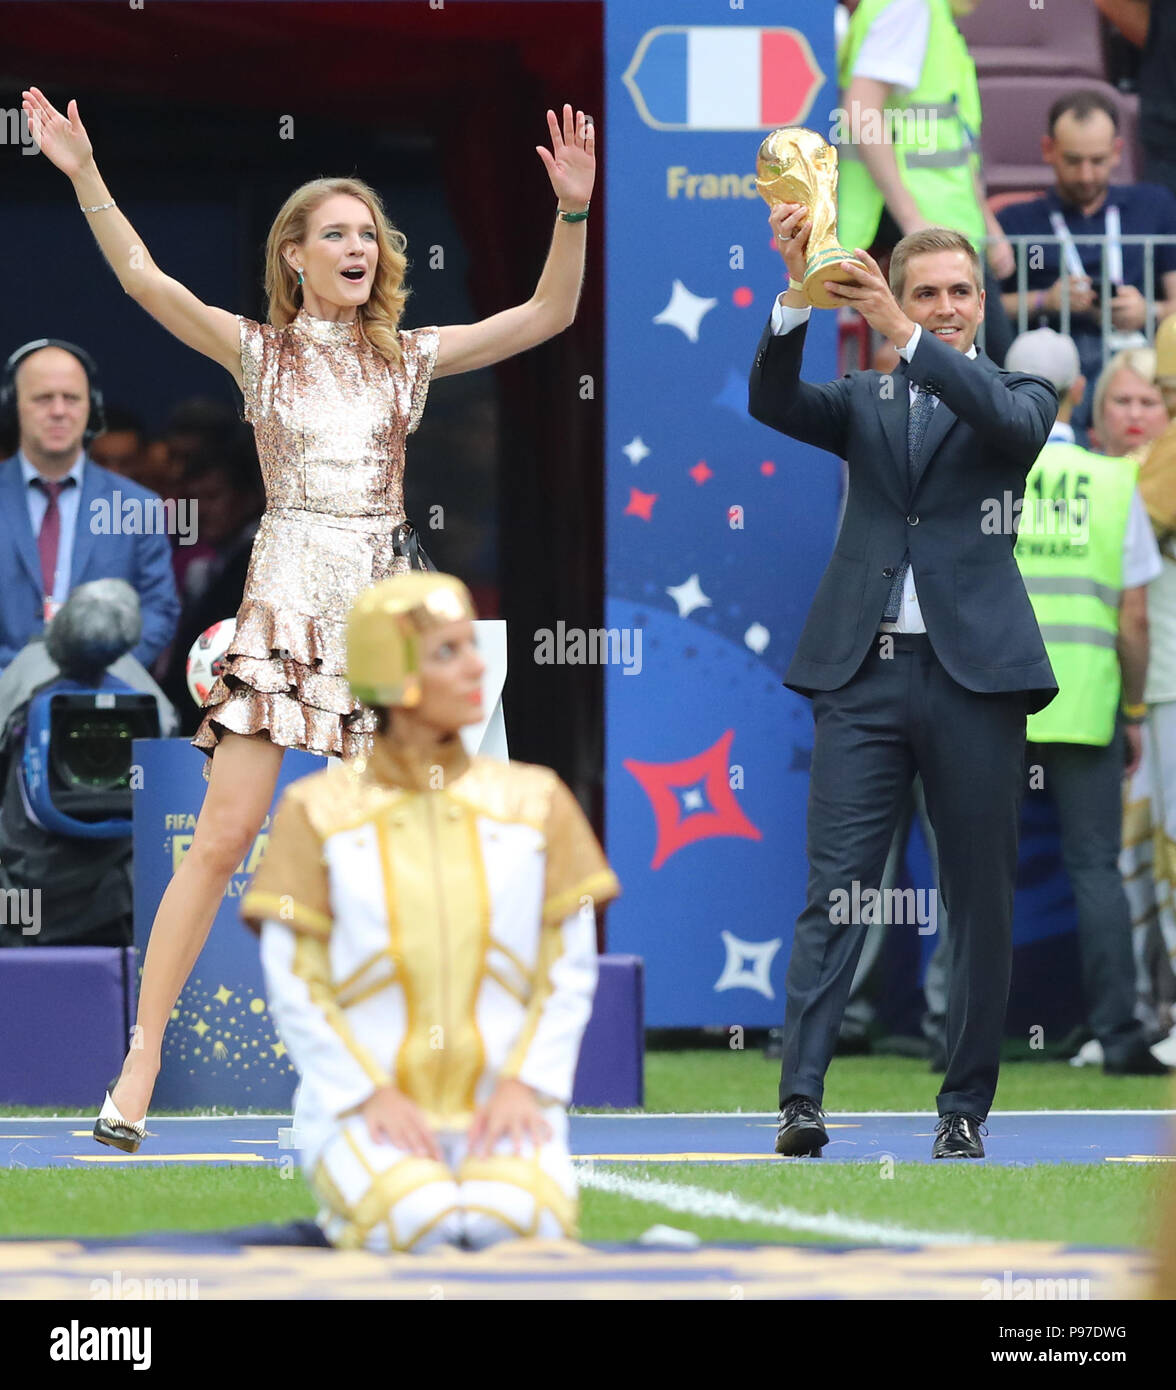 Moscow, Russia. 15th July, 2018. Former Germany's player Philipp Lahm (R) shows the World Cup trophy during the closing ceremony of the 2018 FIFA World Cup in Moscow, Russia, July 15, 2018. Credit: Yang Lei/Xinhua/Alamy Live News Stock Photo